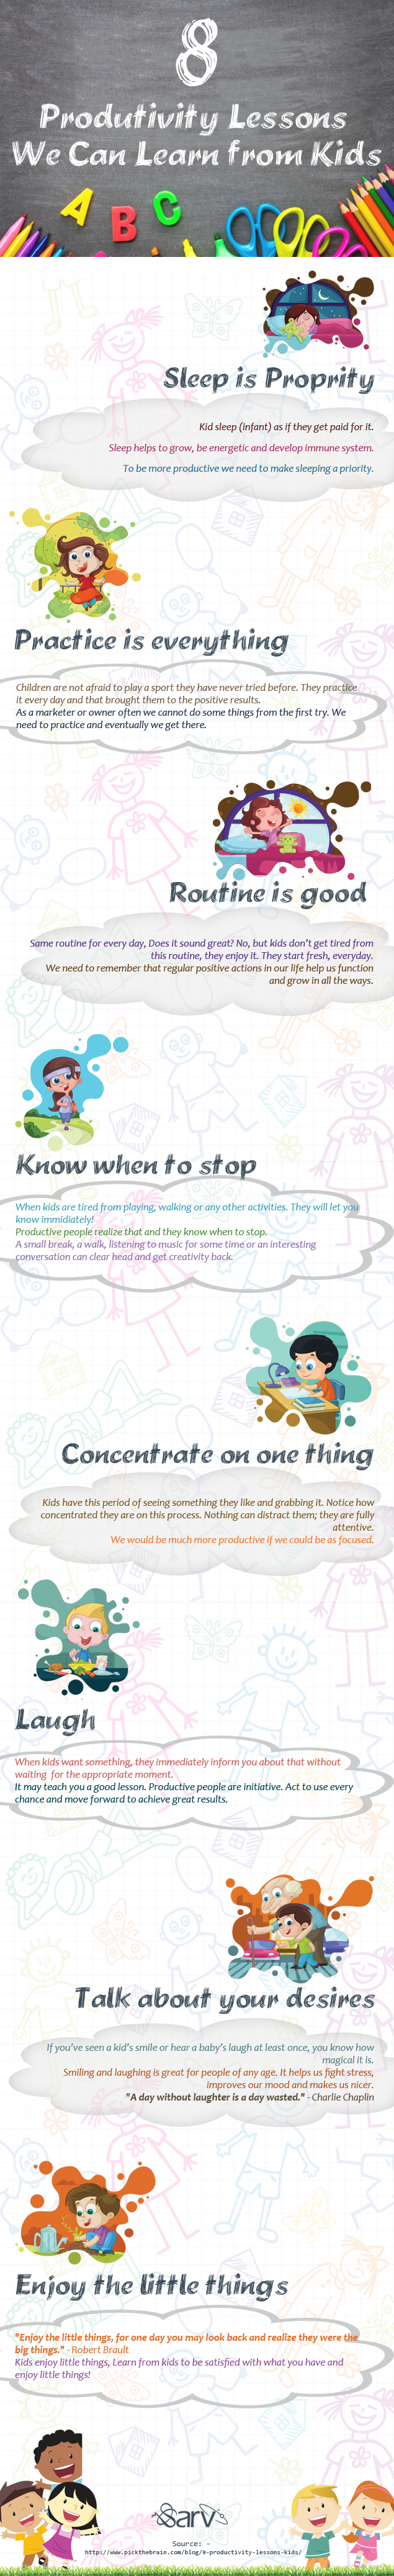 8-productivity- lessons-we-can- learn-from-kids